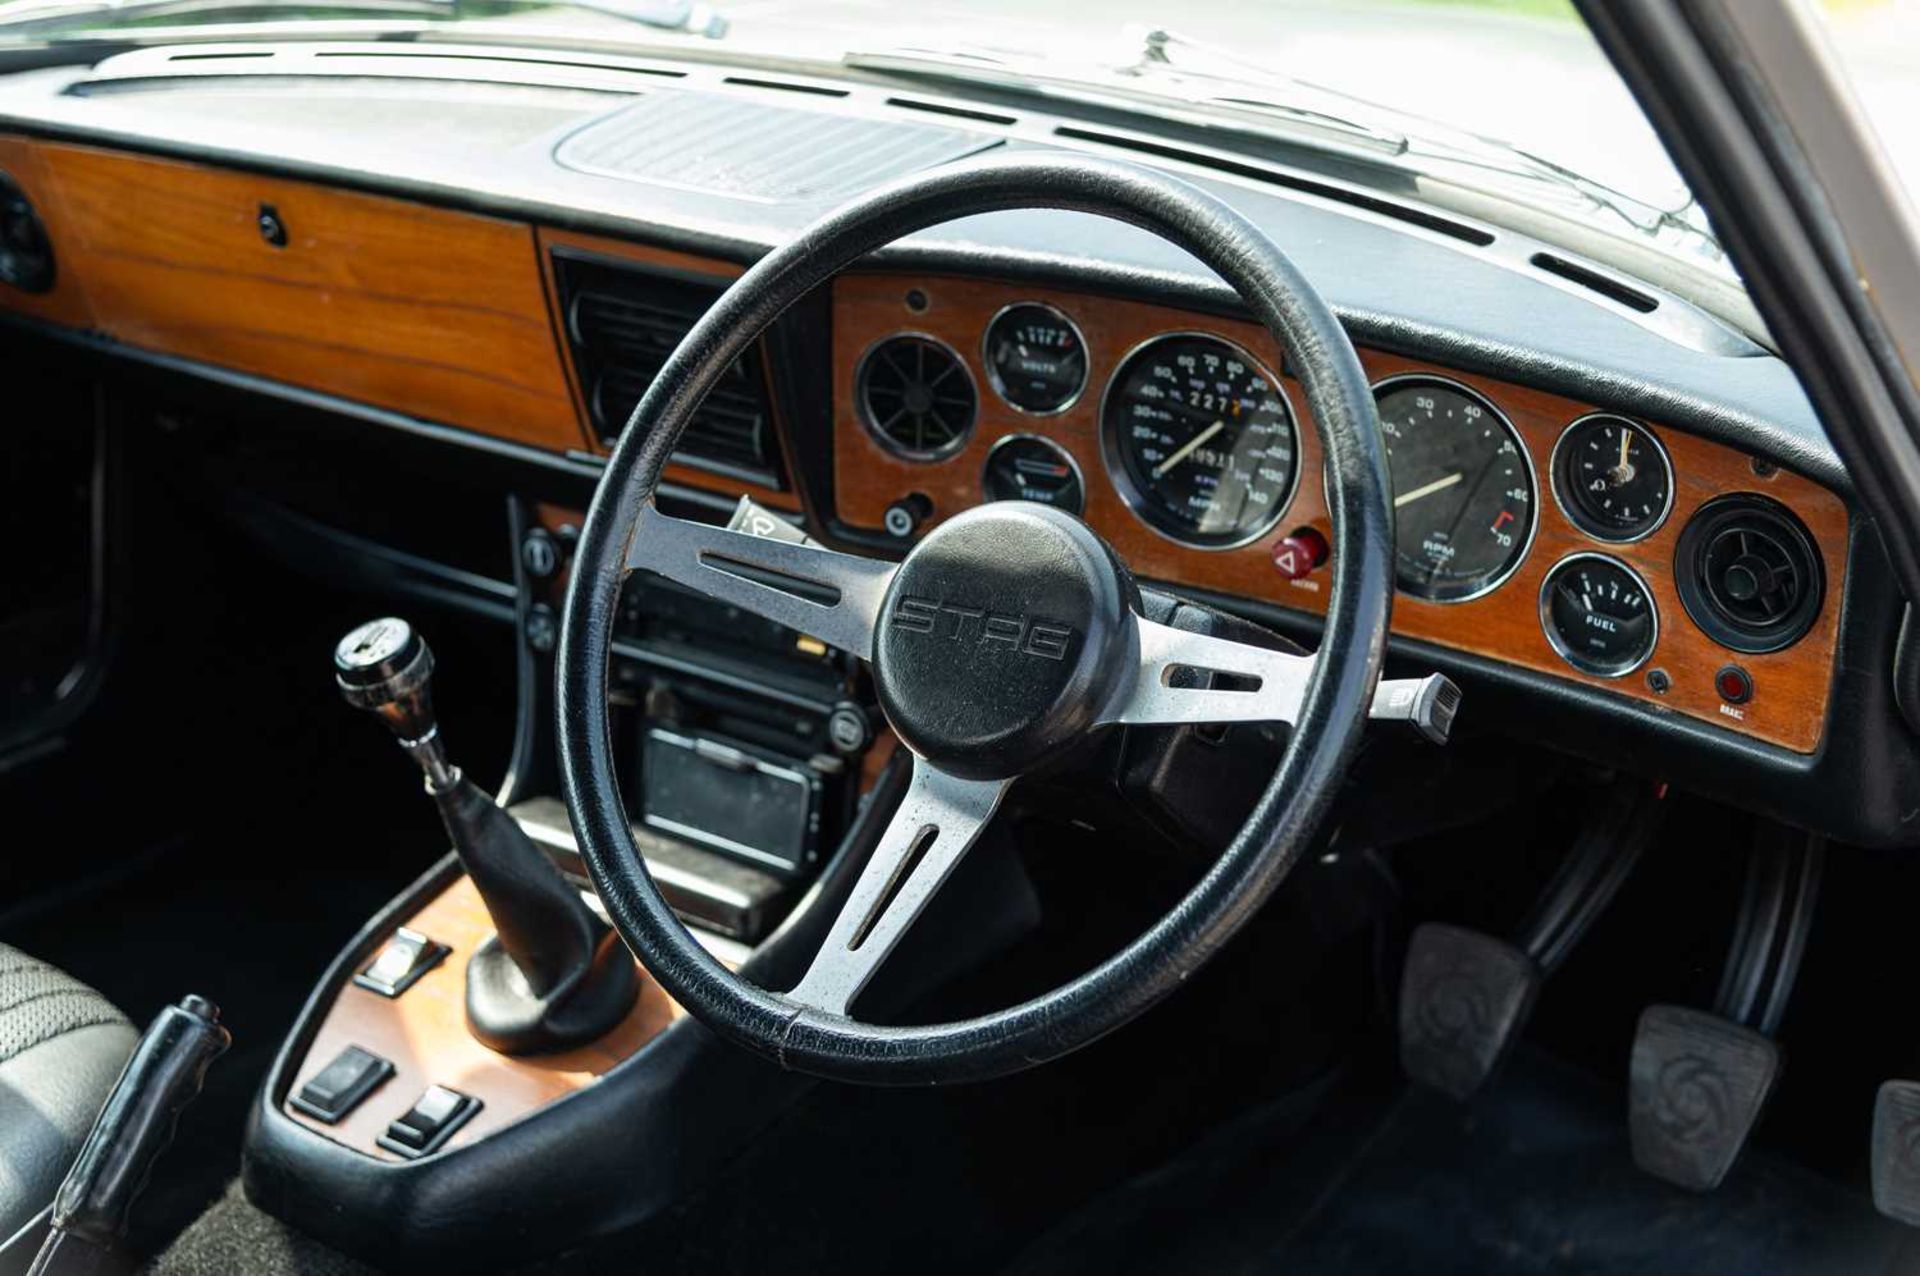 1974 Triumph Stag ***NO RESERVE*** Fully-restored example, equipped with manual overdrive transmissi - Image 62 of 83